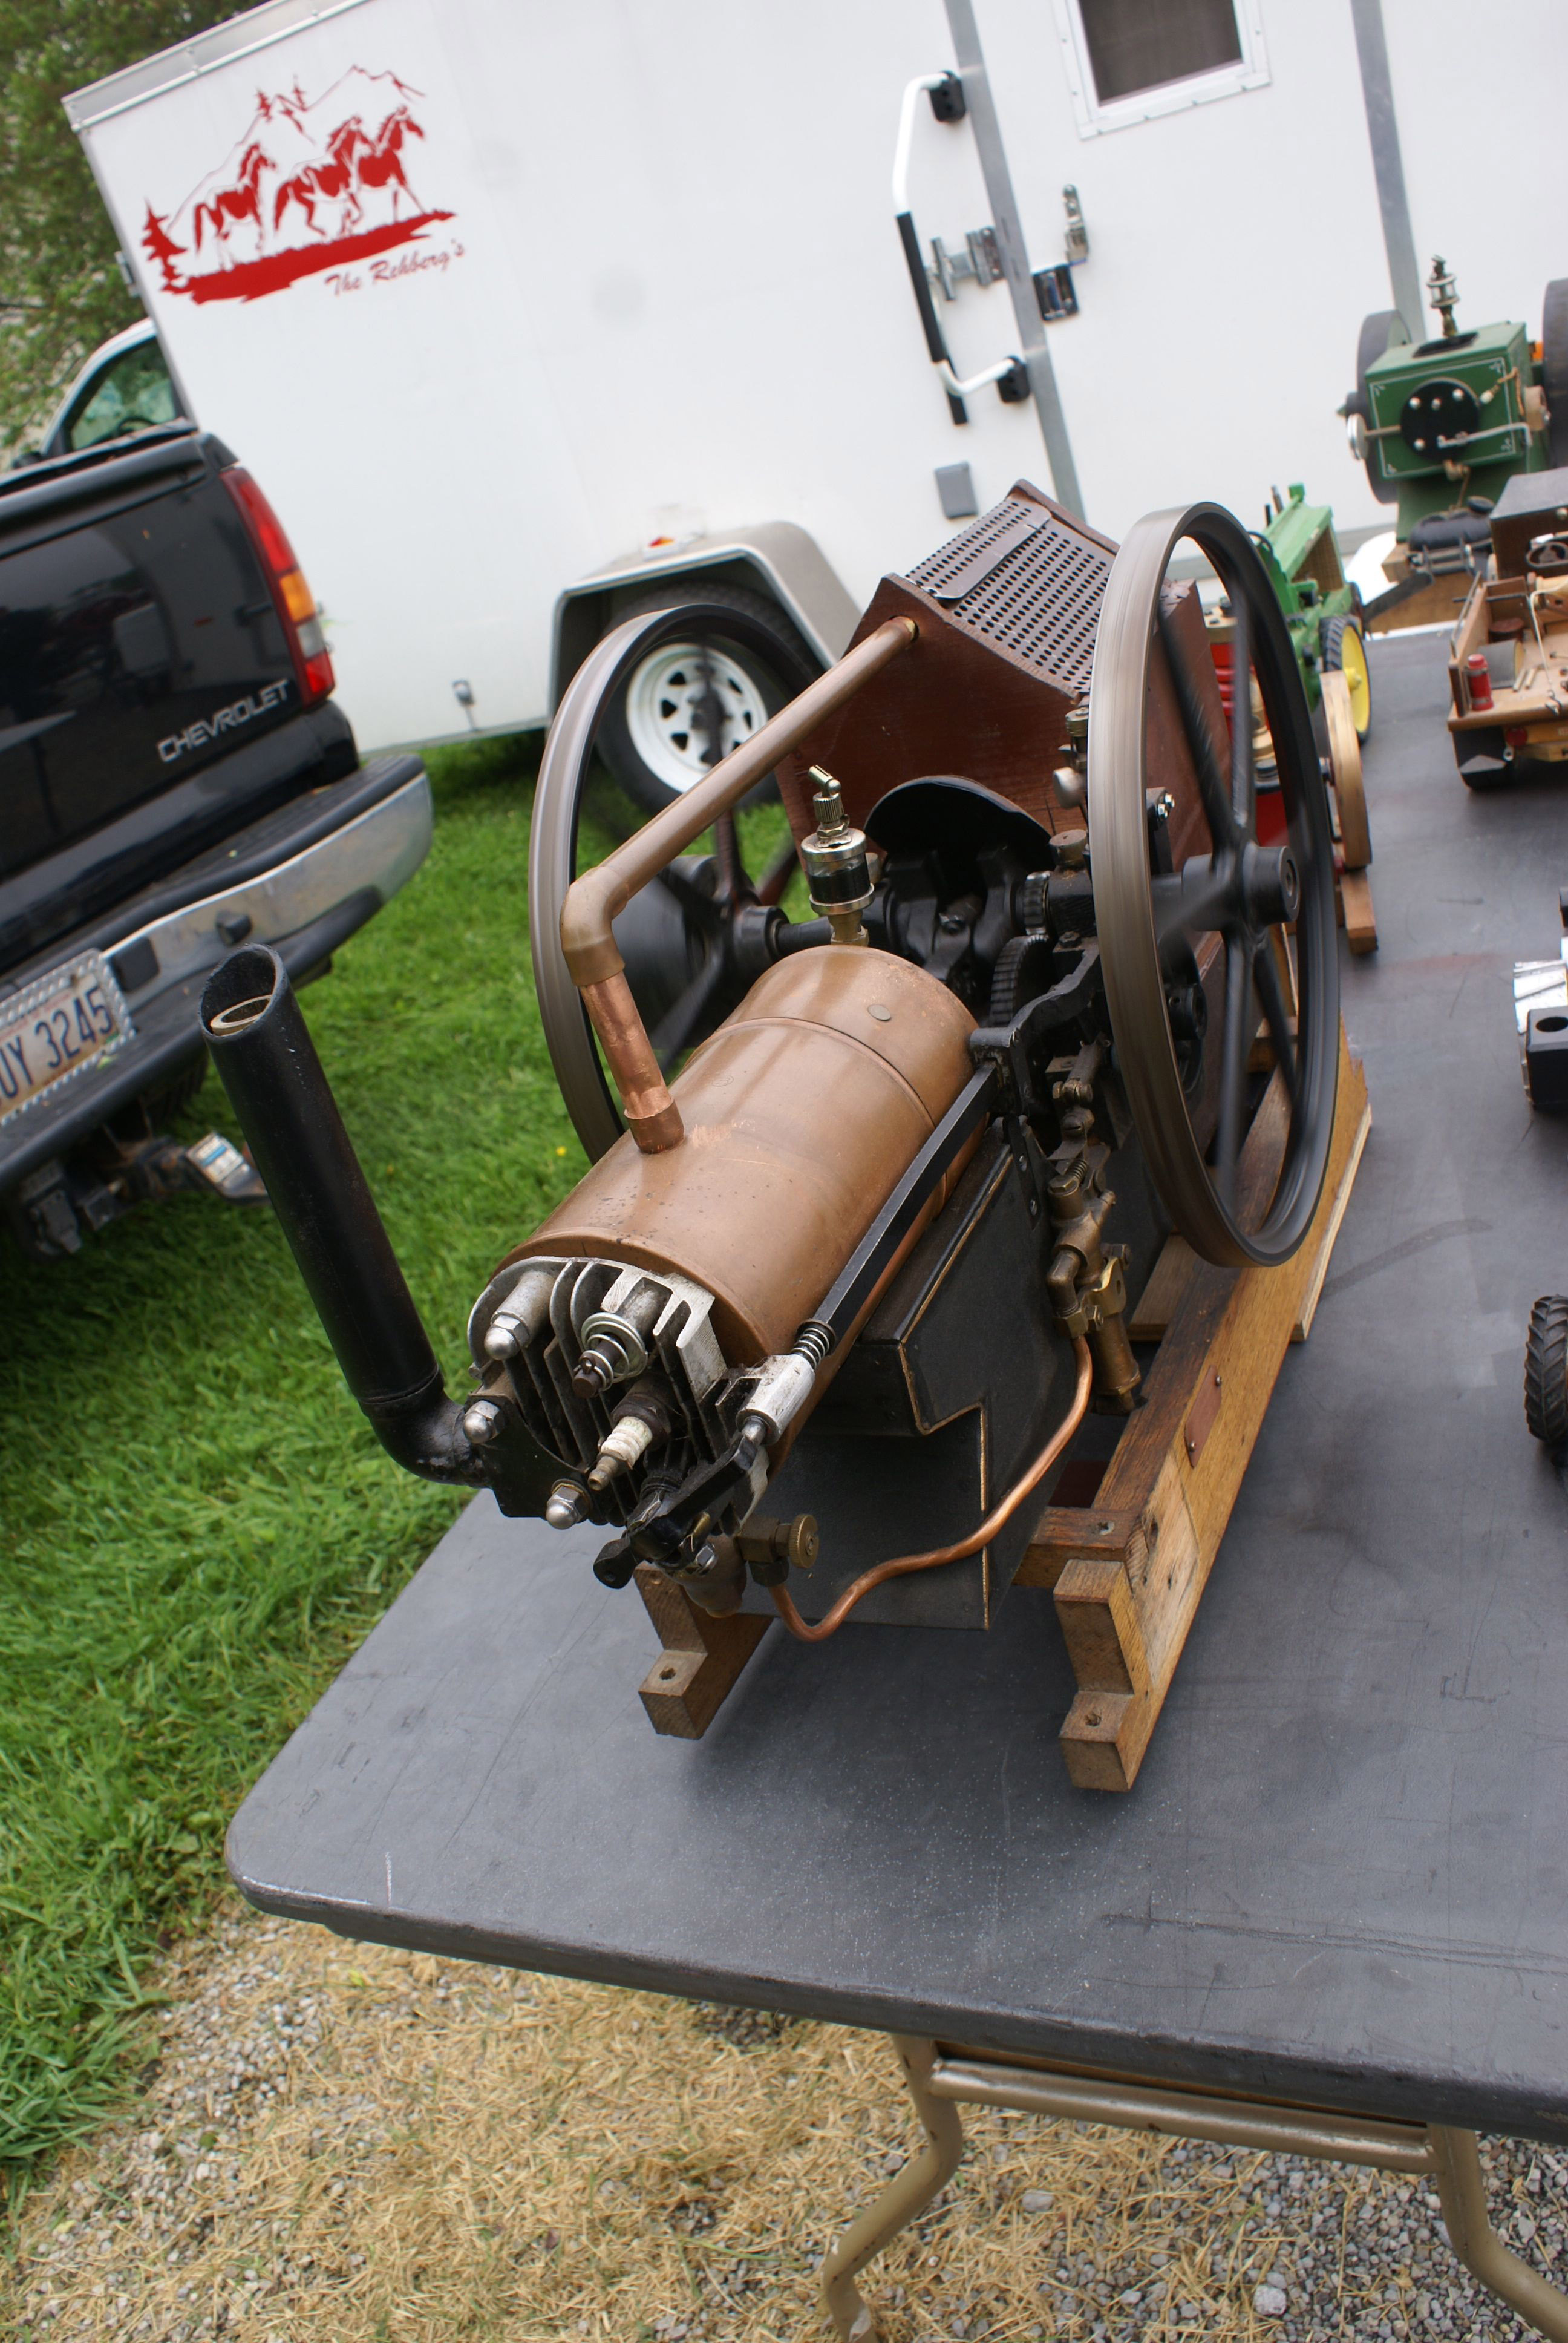 One of the first handcrafted miniature engines.